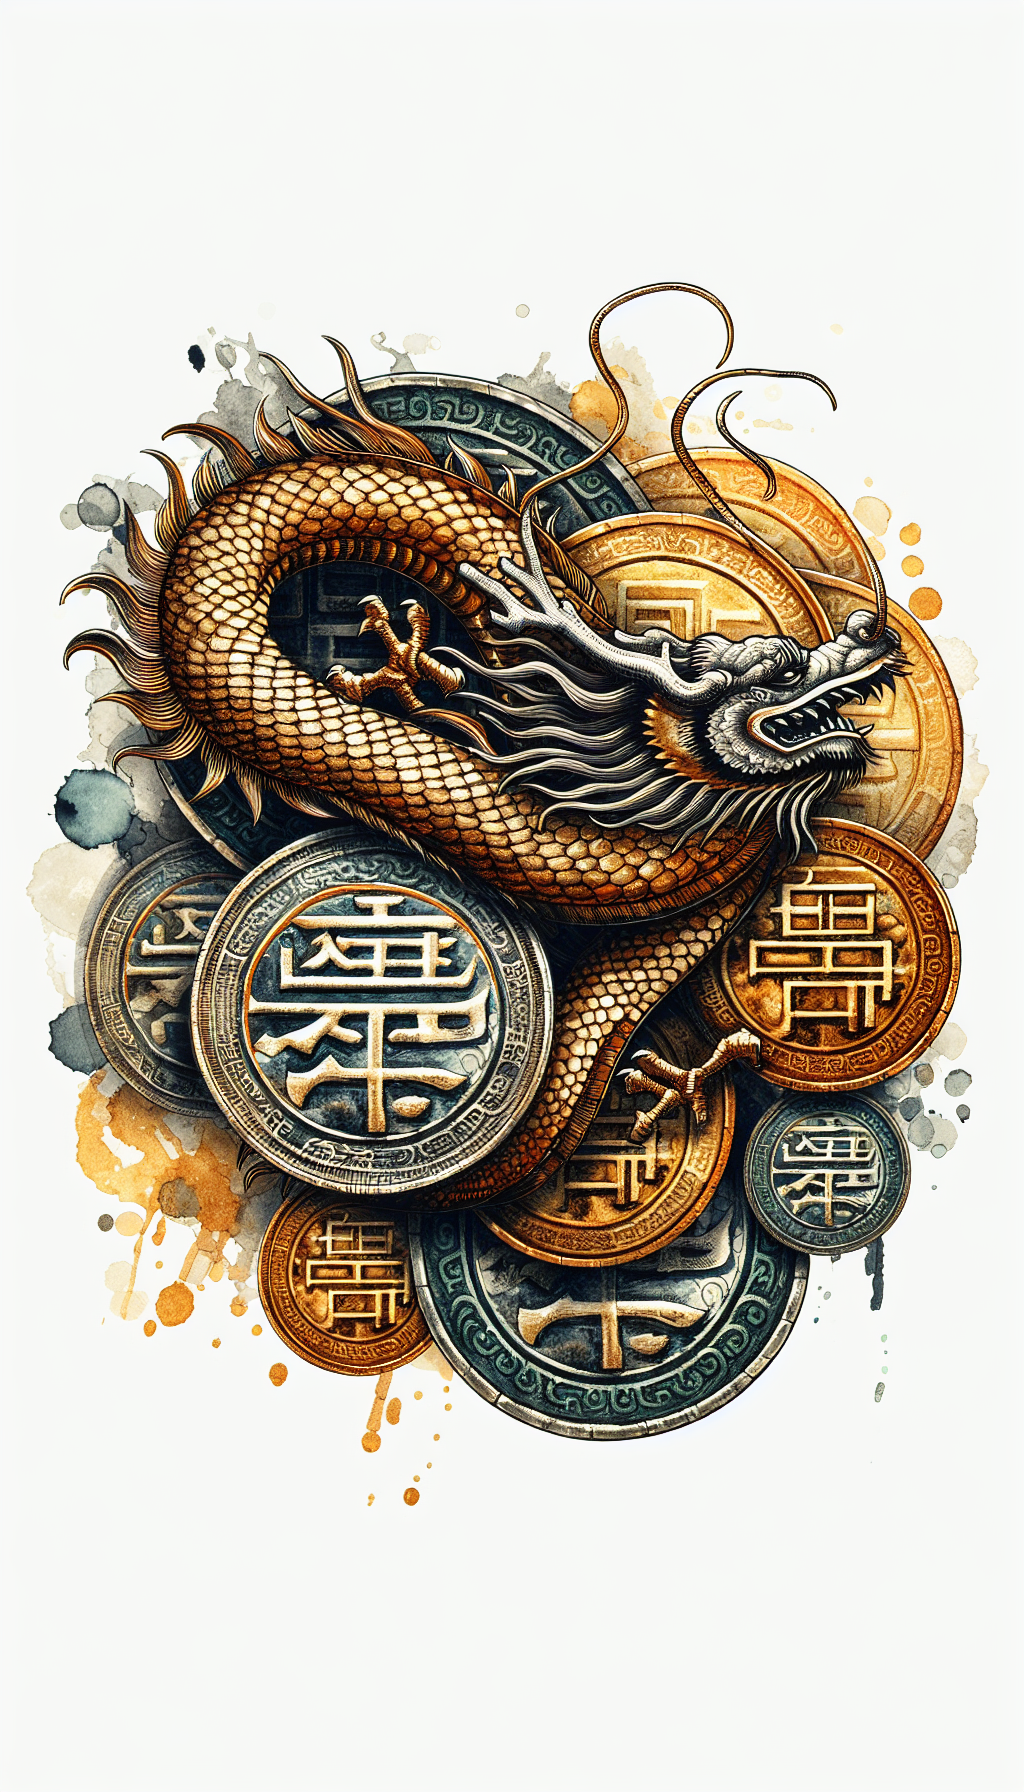 An intricate illustration depicts a majestic dragon gracefully entwined around ancient Chinese coins, with symbols of wealth such as golden ingots, and rice stalks subtly woven into its scales. Each coin is detailed with traditional calligraphy and iconography, shimmering as if hinting at their once formidable purchasing power, blending watercolor textures with sharp, metallic linework to signify a fusion of prosperity and enduring value.